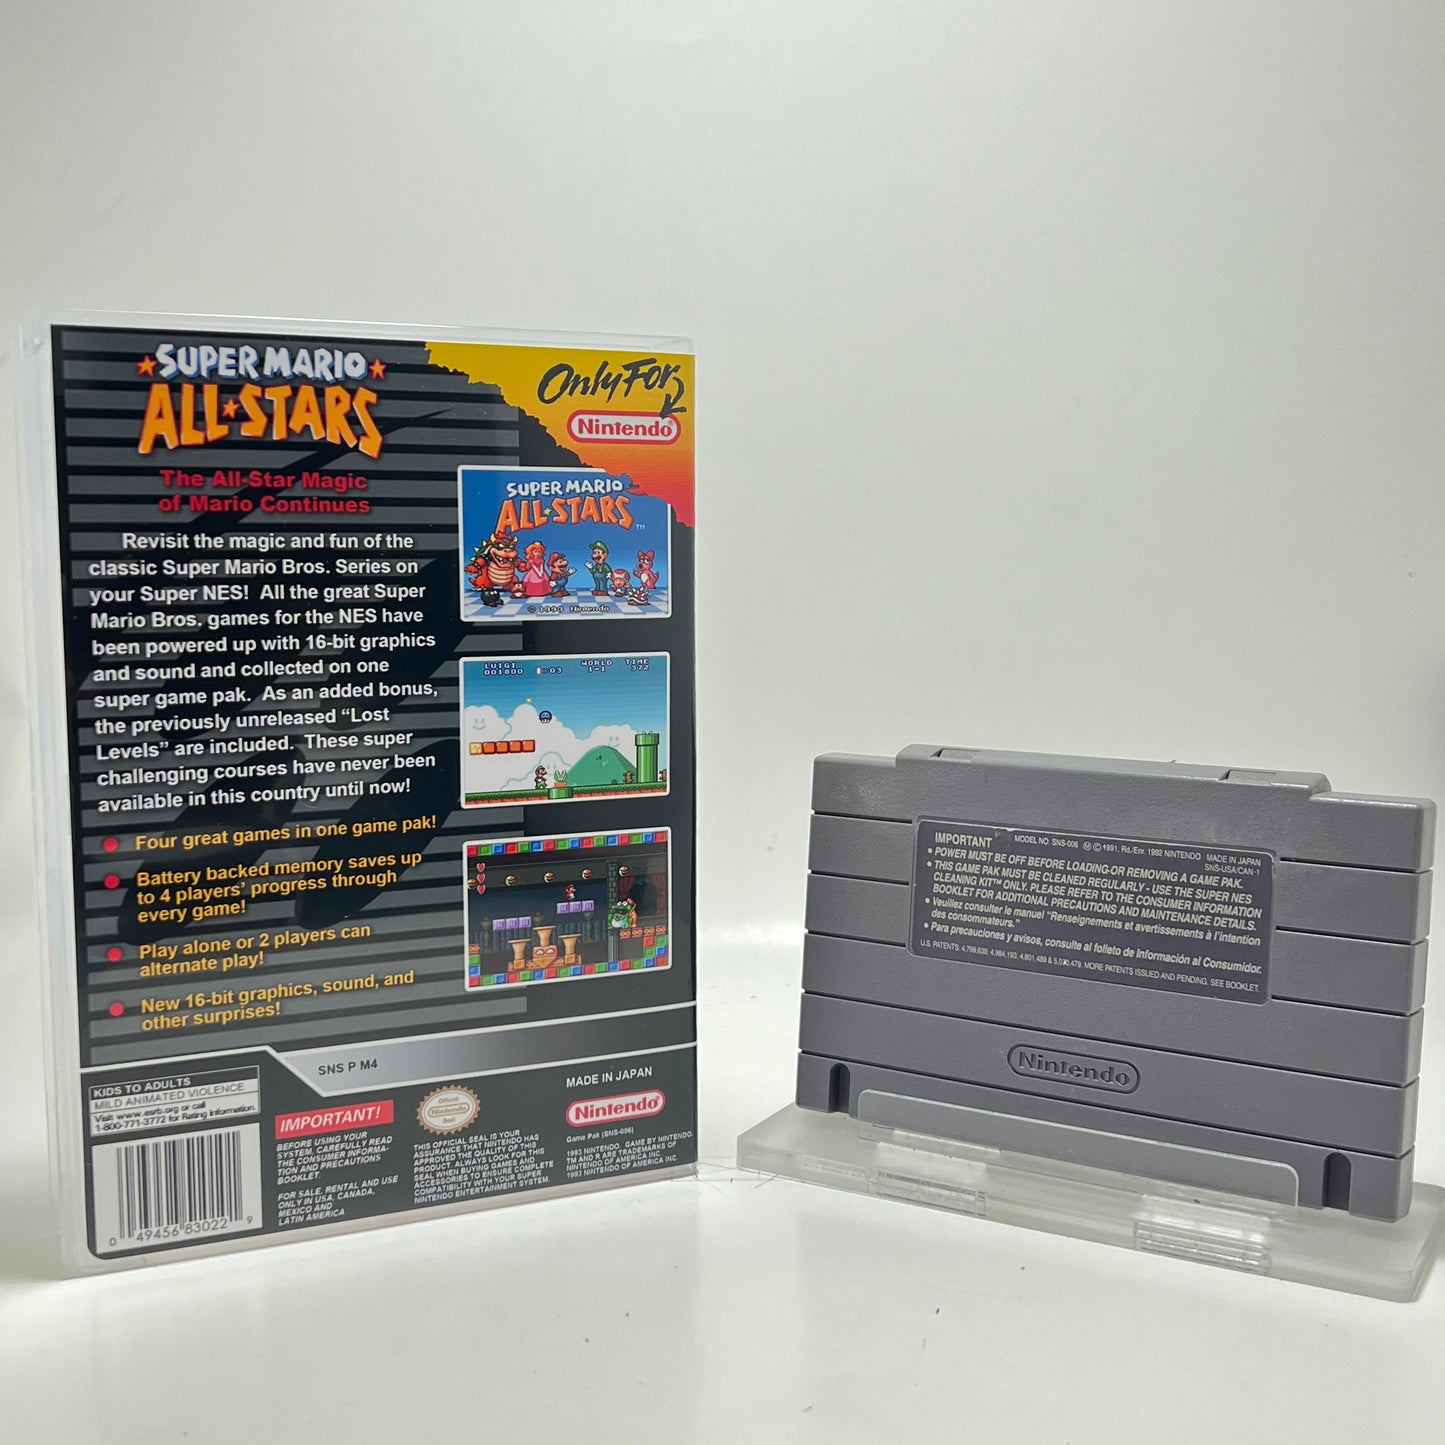 Super Mario All-Stars with Universal Game Case